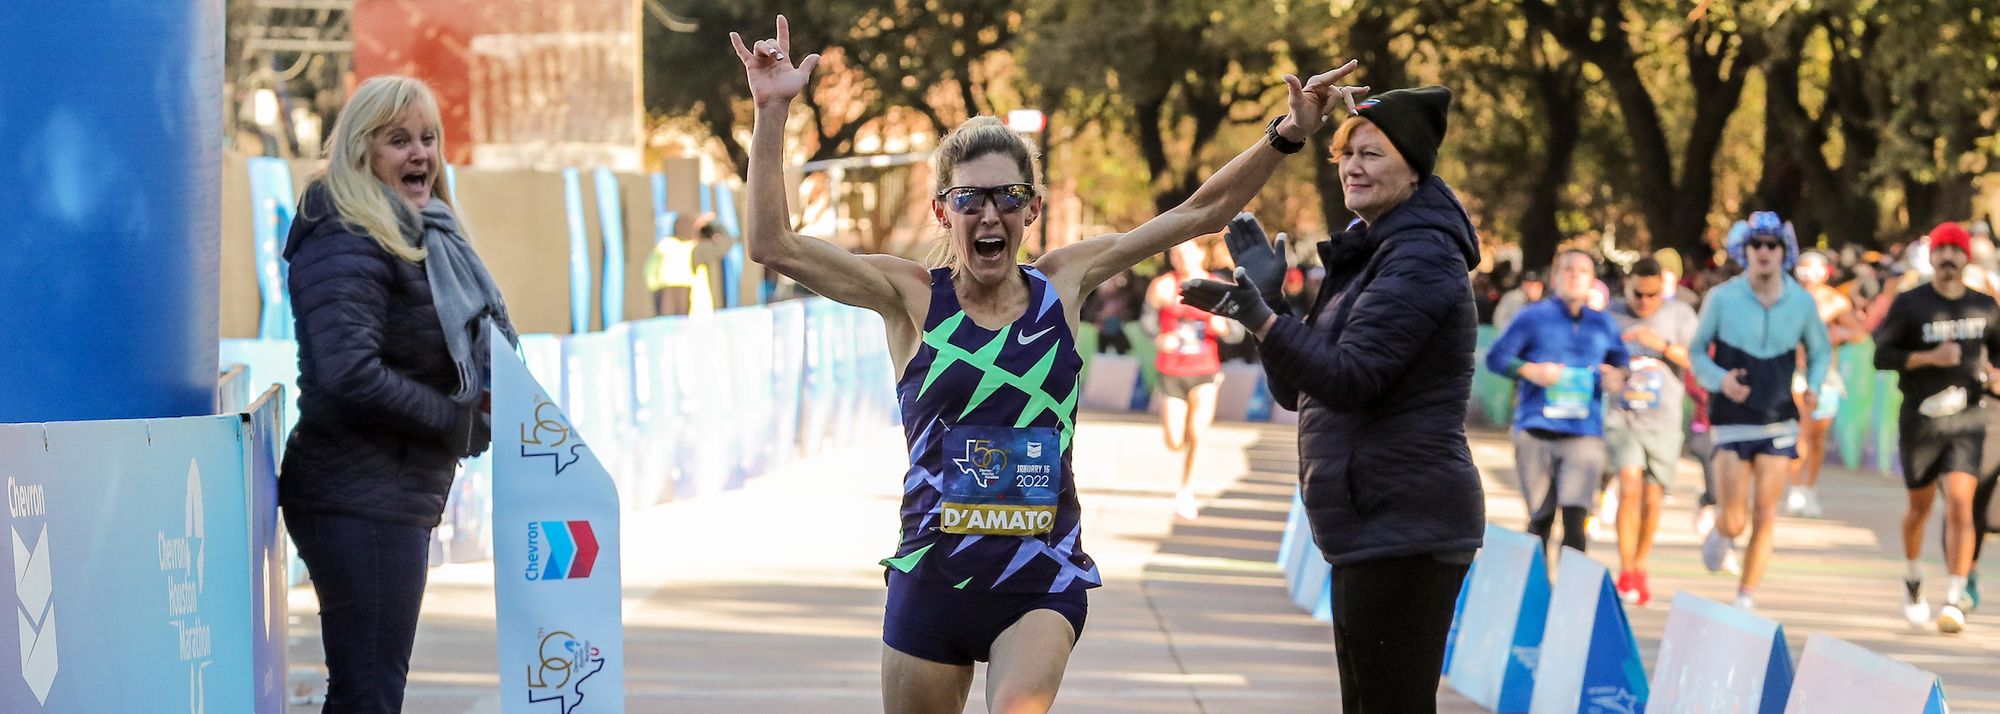 Keira D'Amato broke the long-standing US women’s marathon record, while Kenya’s Vicoty Chepngeno set a North American all-comers’ half marathon record on a busy morning of road race action.